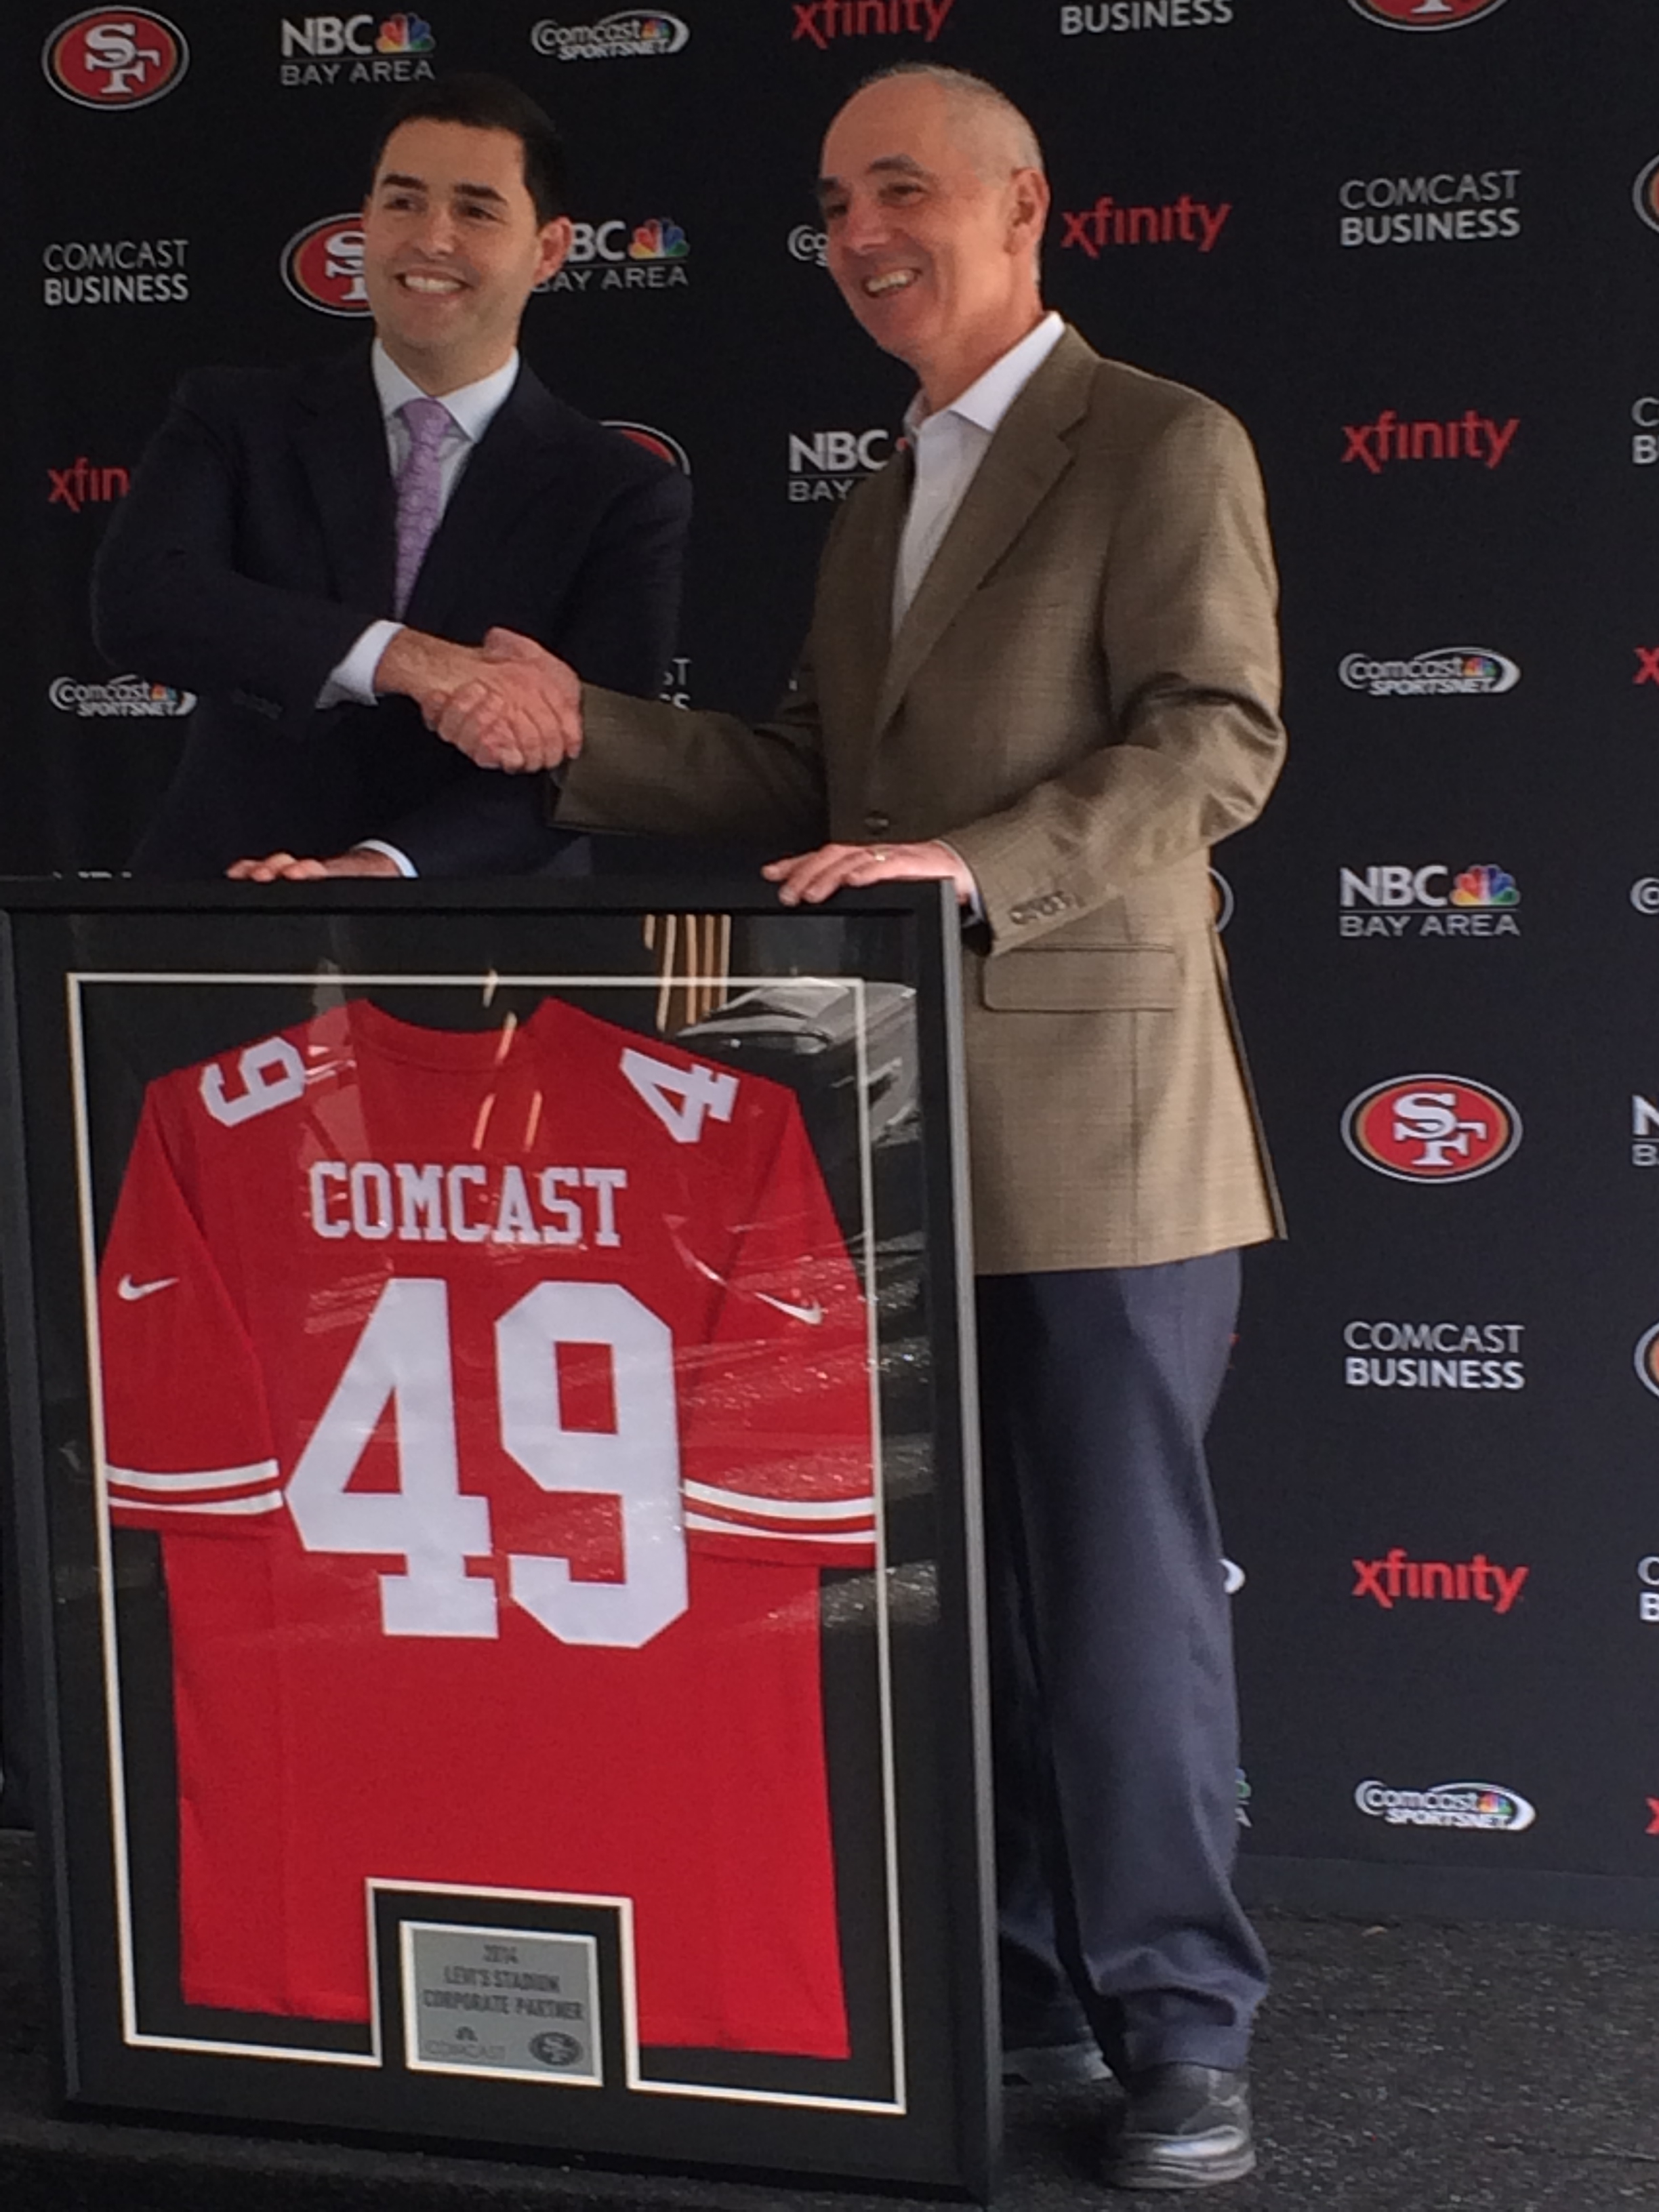 Comcast, NBCUniversal, 49ers Announce 10-Year Partnership - NBC Bay Area